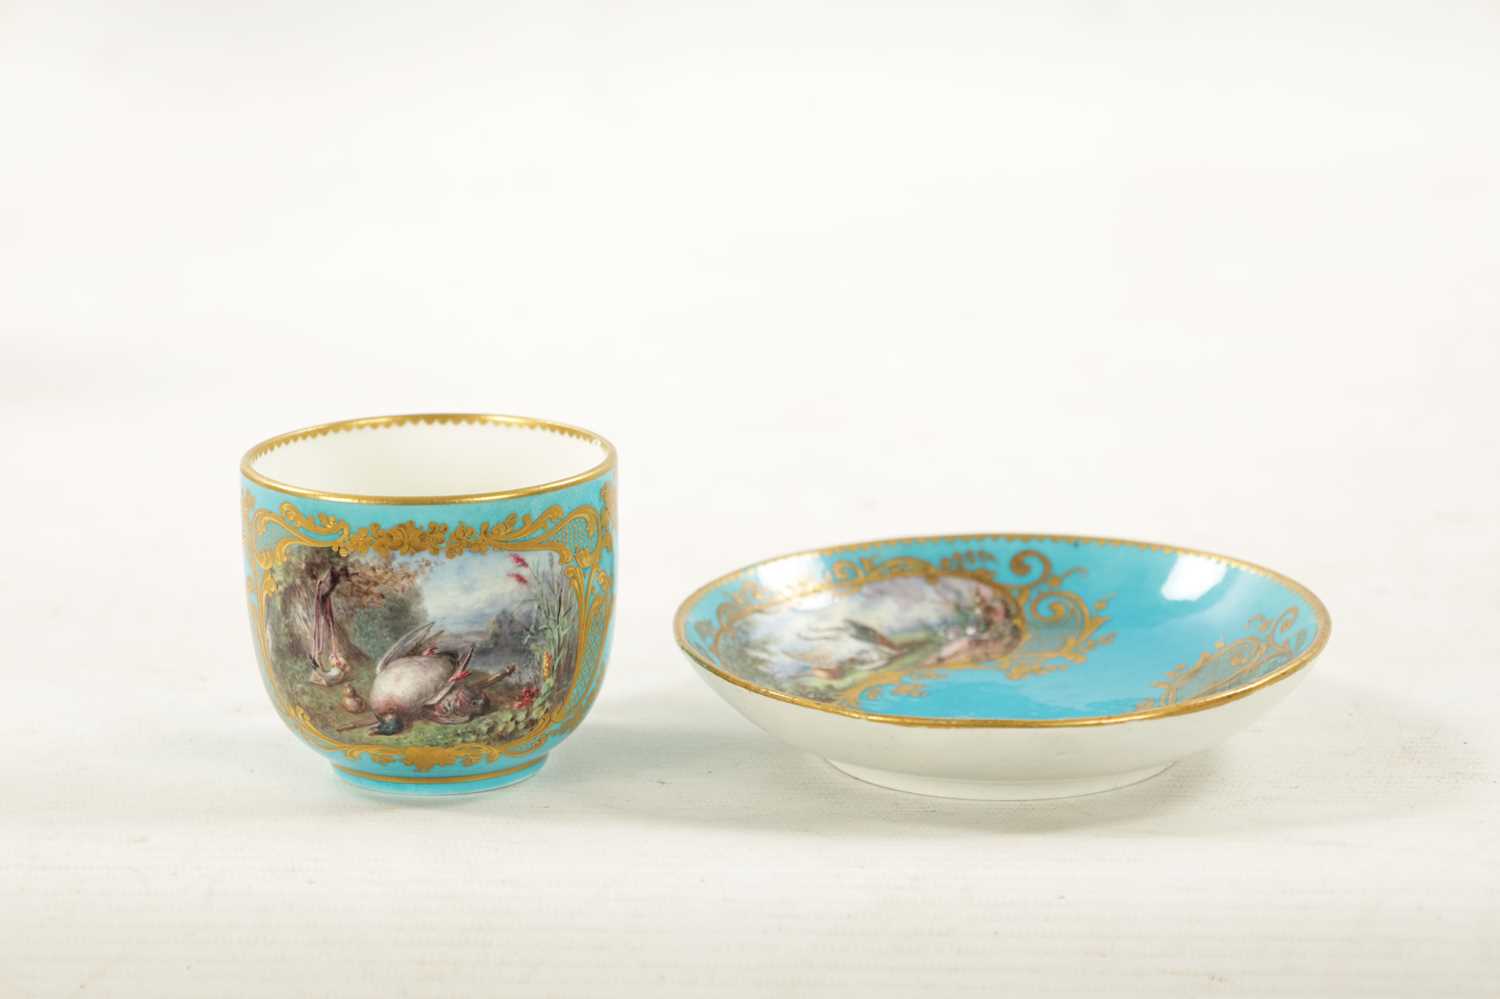 A FINE LATE 18TH / 19TH CENTURY SEVRES PORCELAIN CUP AND SAUCER - Image 7 of 13